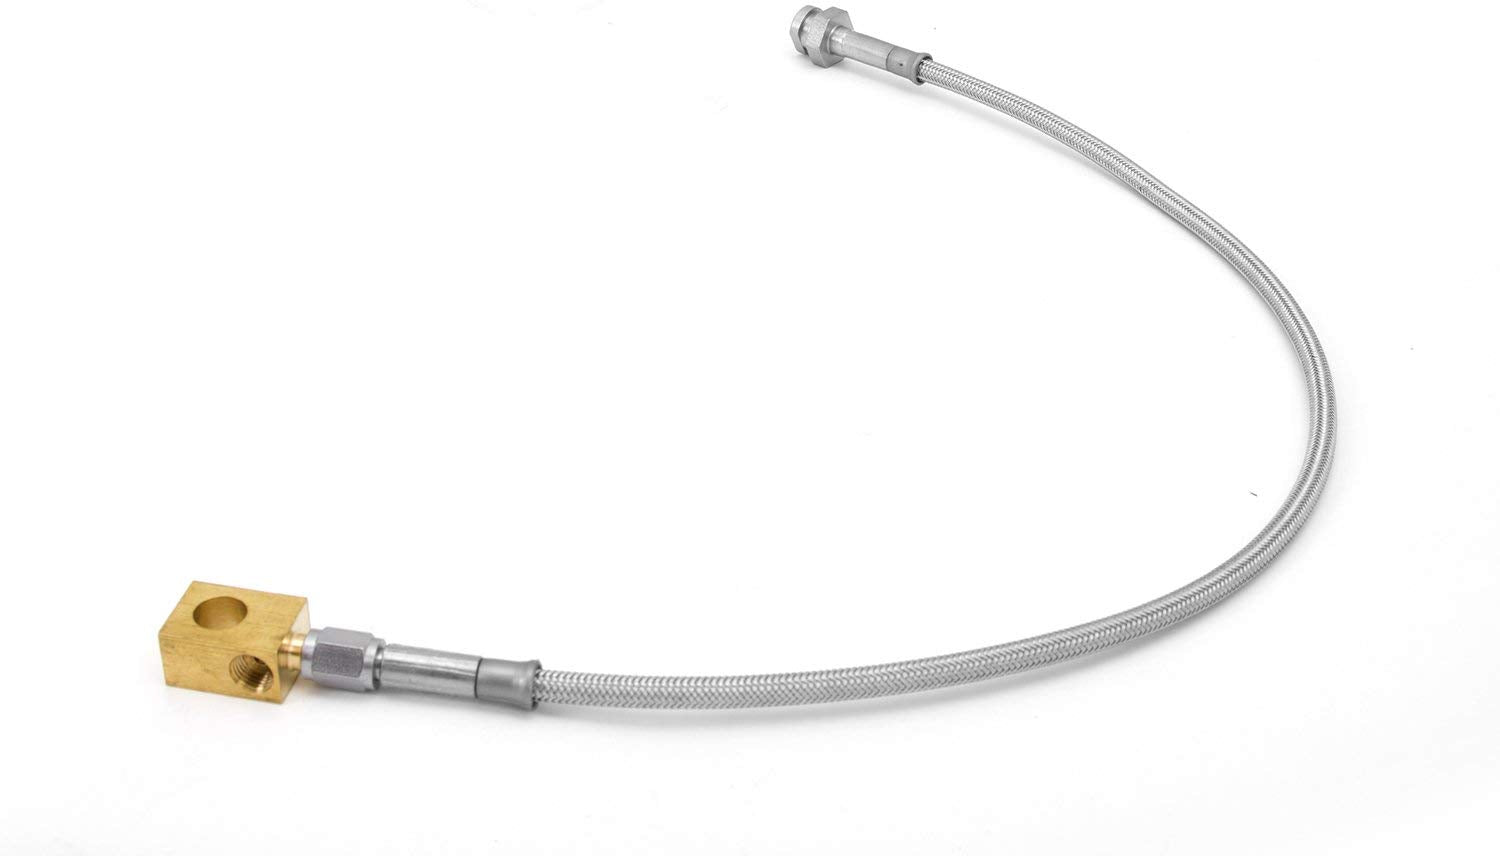 Brake Hose, Rear, 4 Inches Long, Steel Braided, 1972-1973 Commando - The JeepsterMan